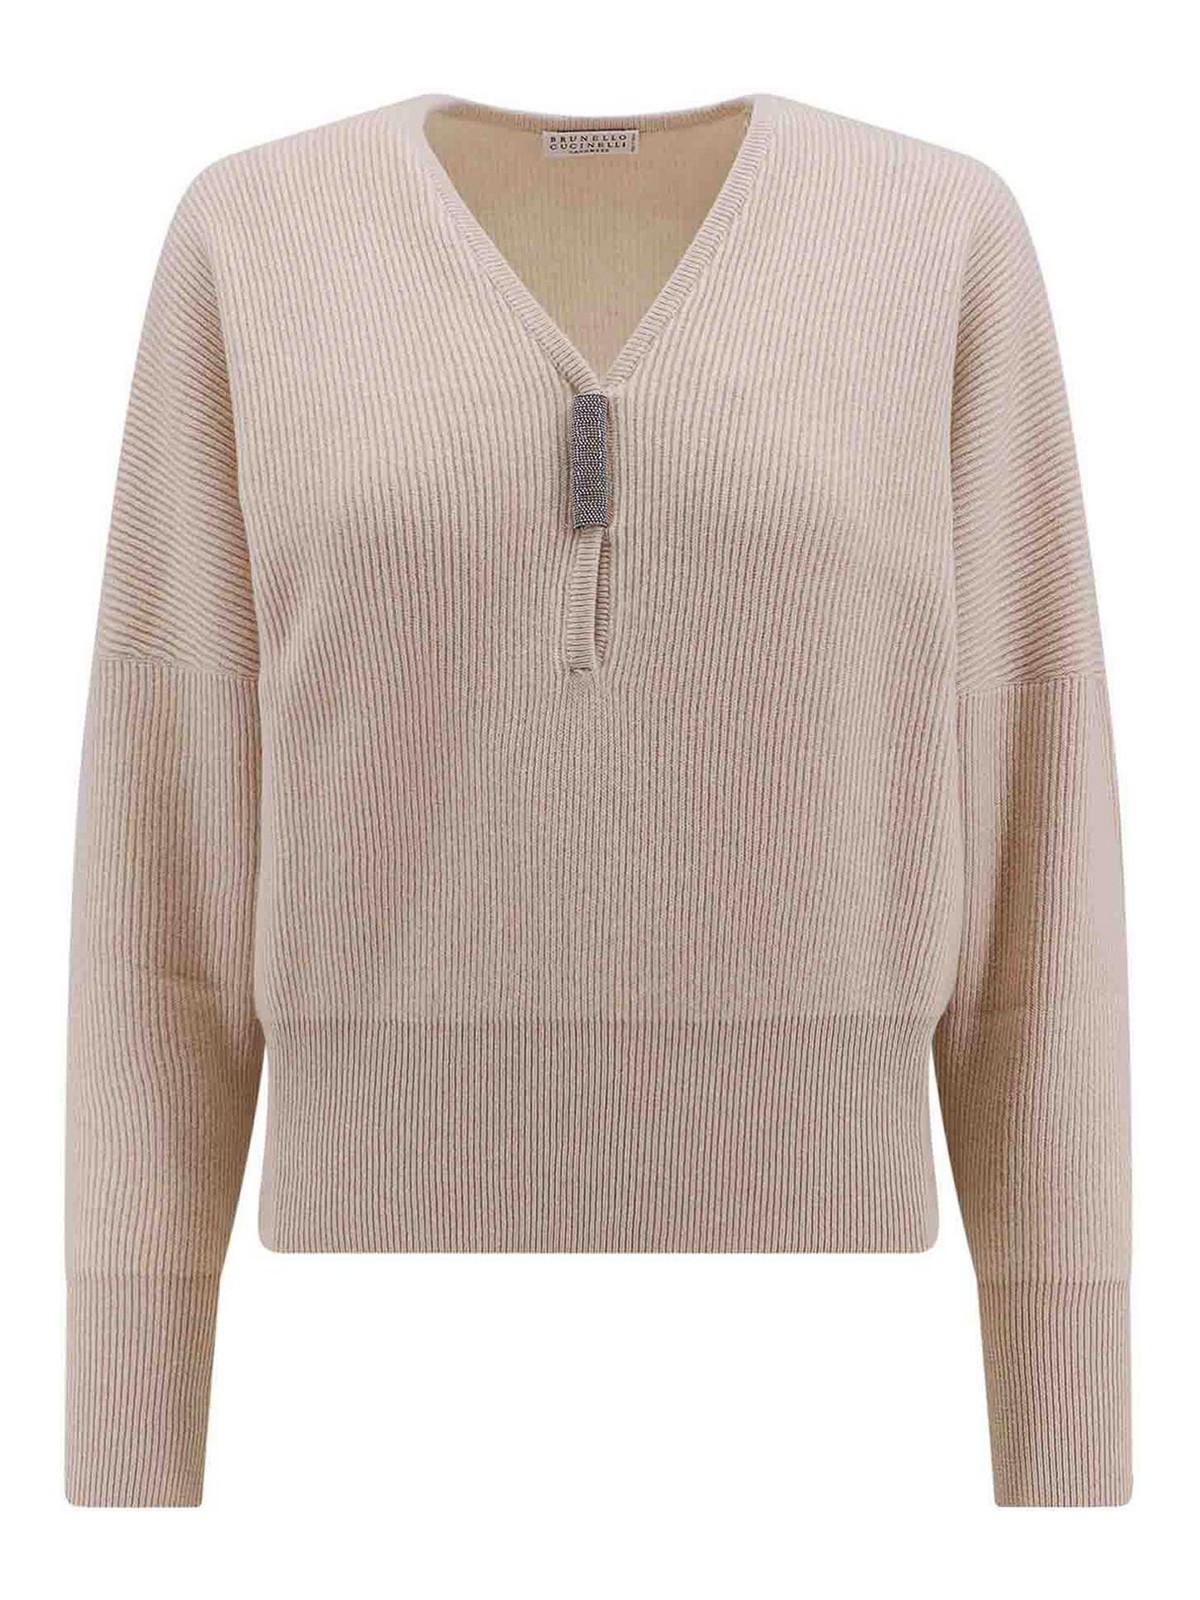 Brunello Cucinelli Cashmere Sweater With Iconic Jewel Details In Neutral